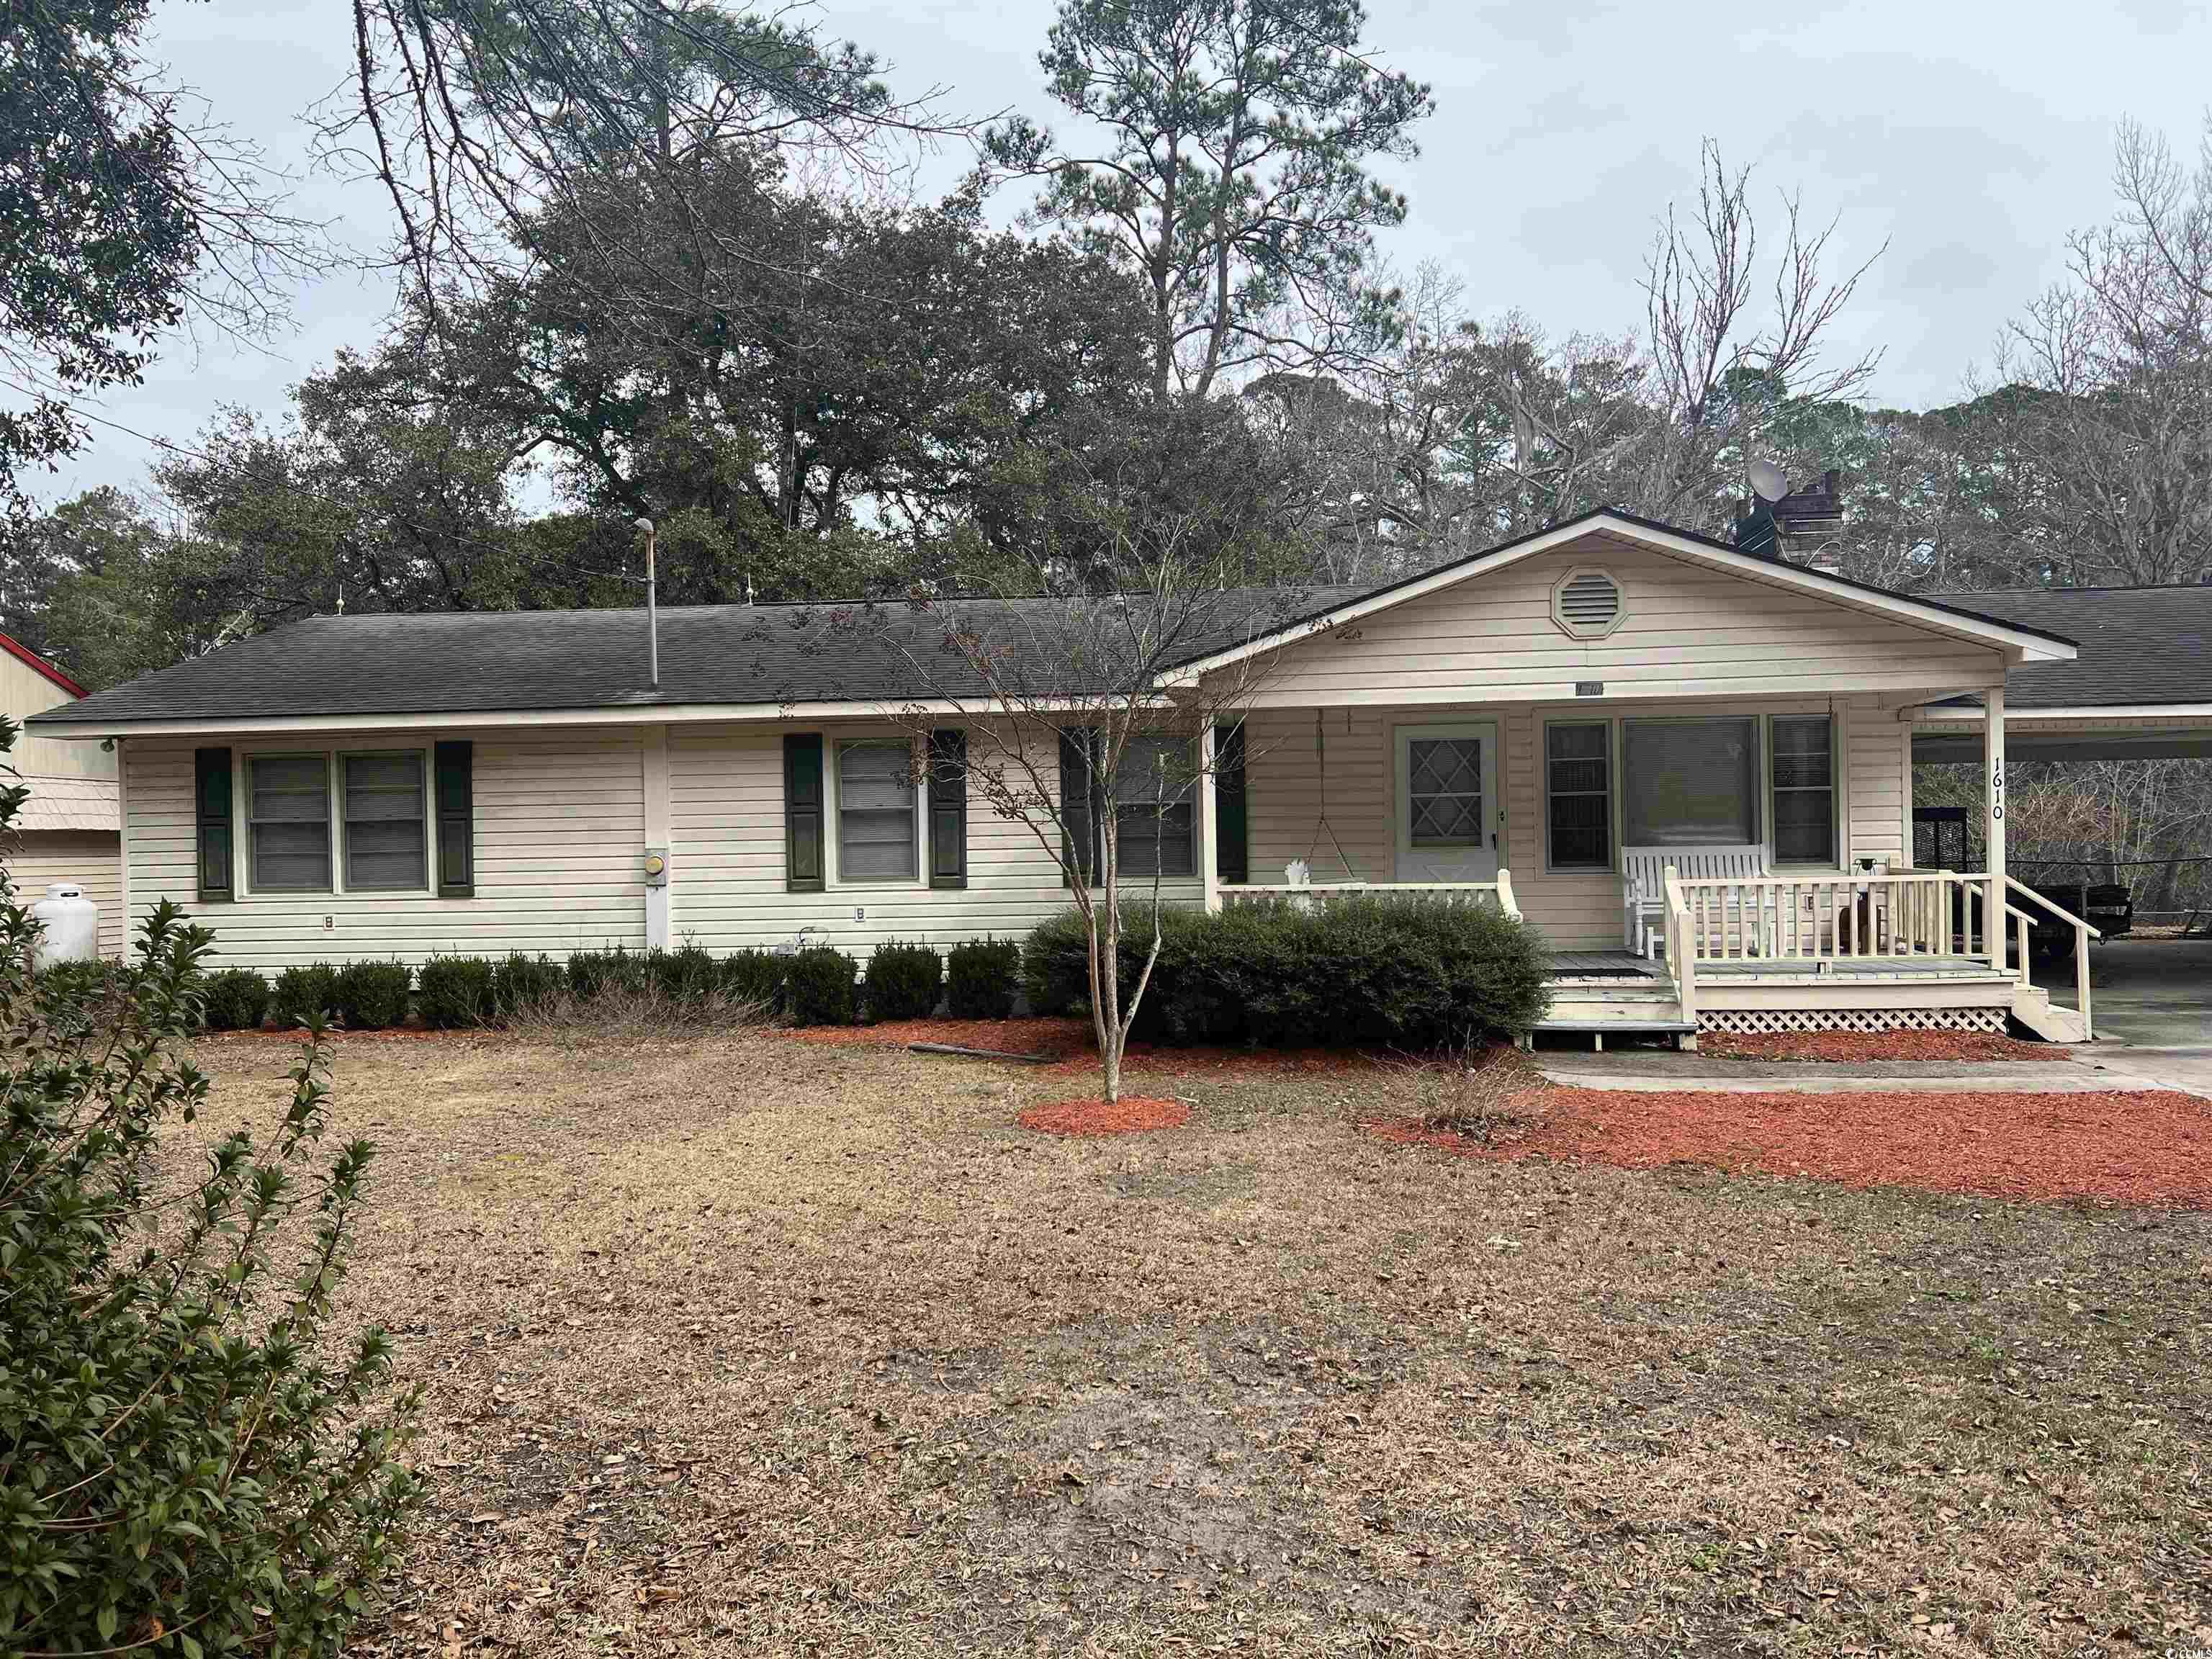 this home is located directly on the waccamaw river with beautiful views. three bedrooms two bath with a large living room kitchen area. lots of room to enjoy the country. 20-25 minutes to conway, loris or myrtle beach.